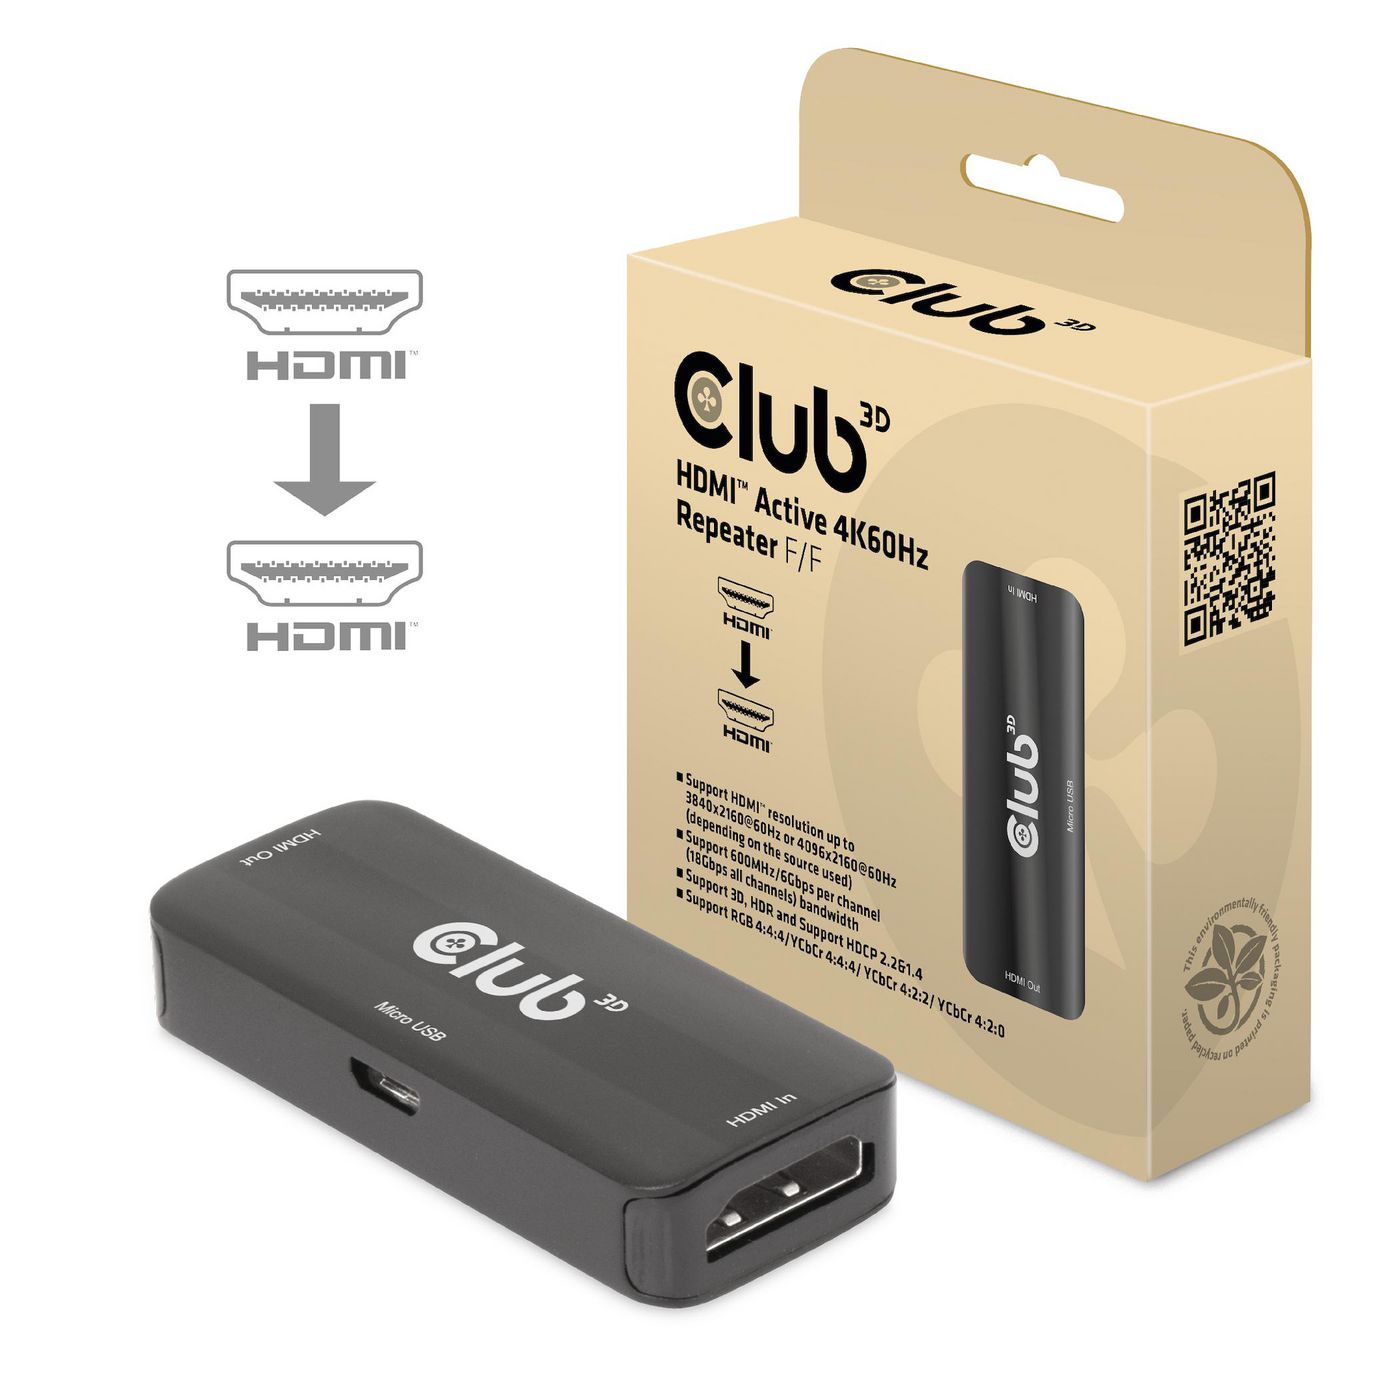 Club3D CAC-1307 W128826661 Hdmi Active 4K60Hz Repeater 